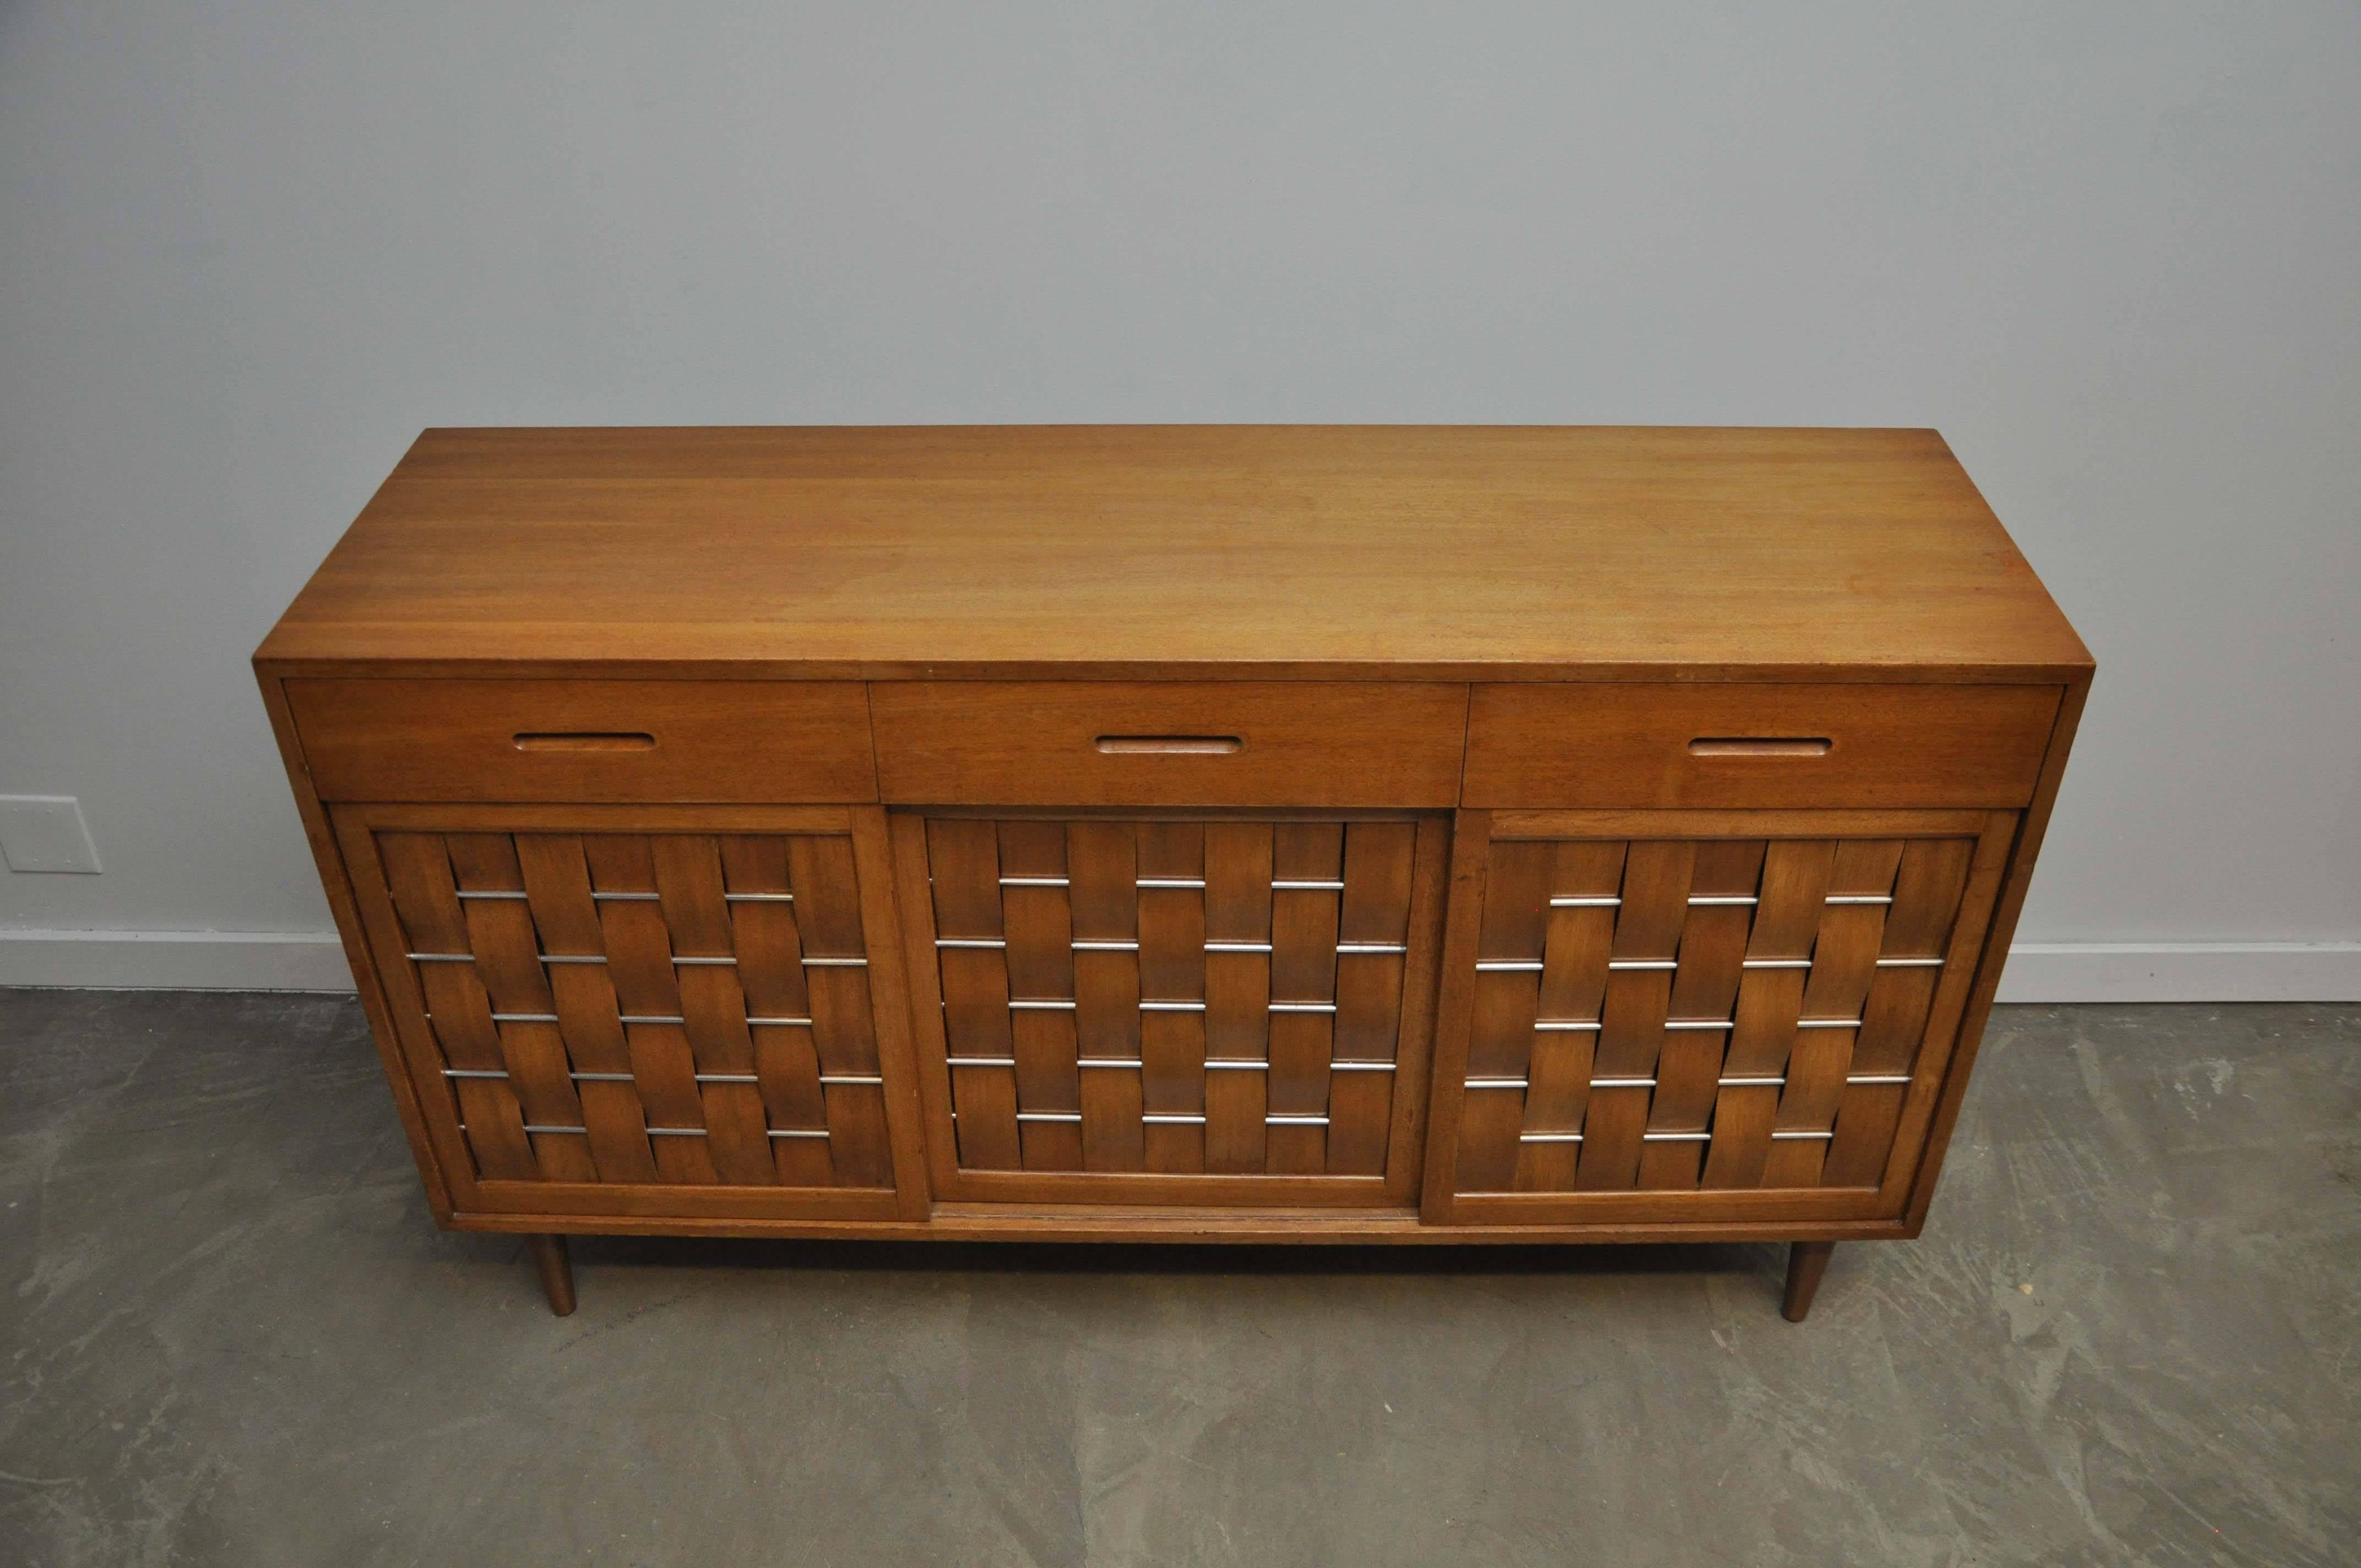 Mahogany woven front sideboard with nickel accent rods. Designed by Edward Wormley for Dunbar, circa 1950s.